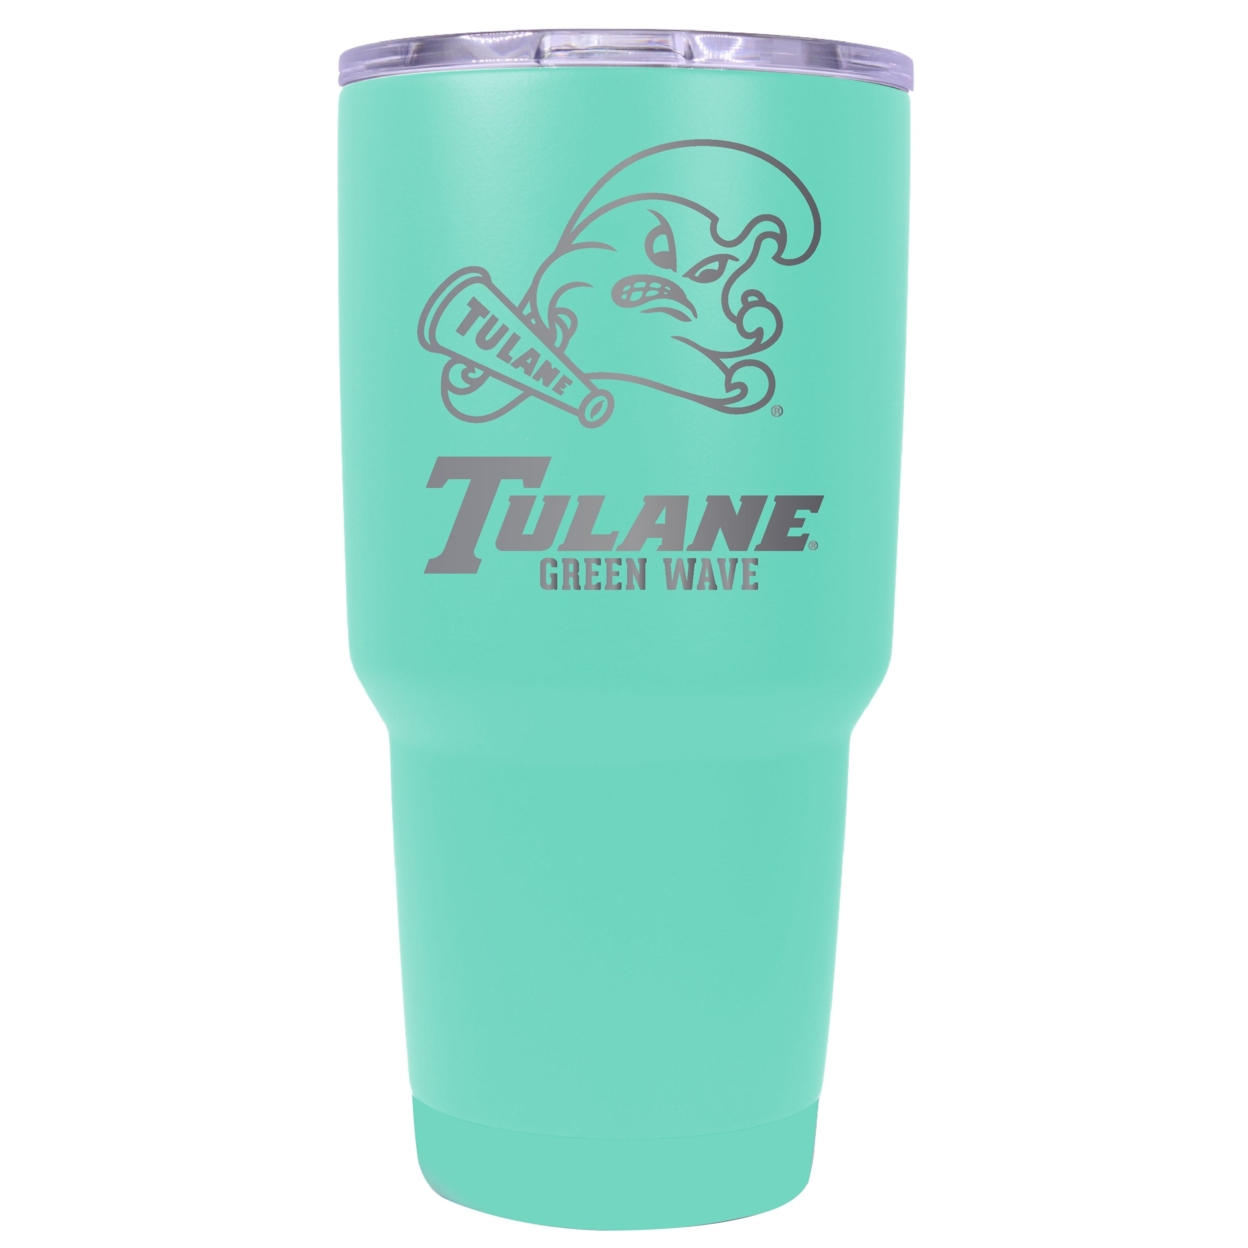 Tulane University Green Wave 24 Oz Laser Engraved Stainless Steel Insulated Tumbler - Choose Your Color. - Seafoam